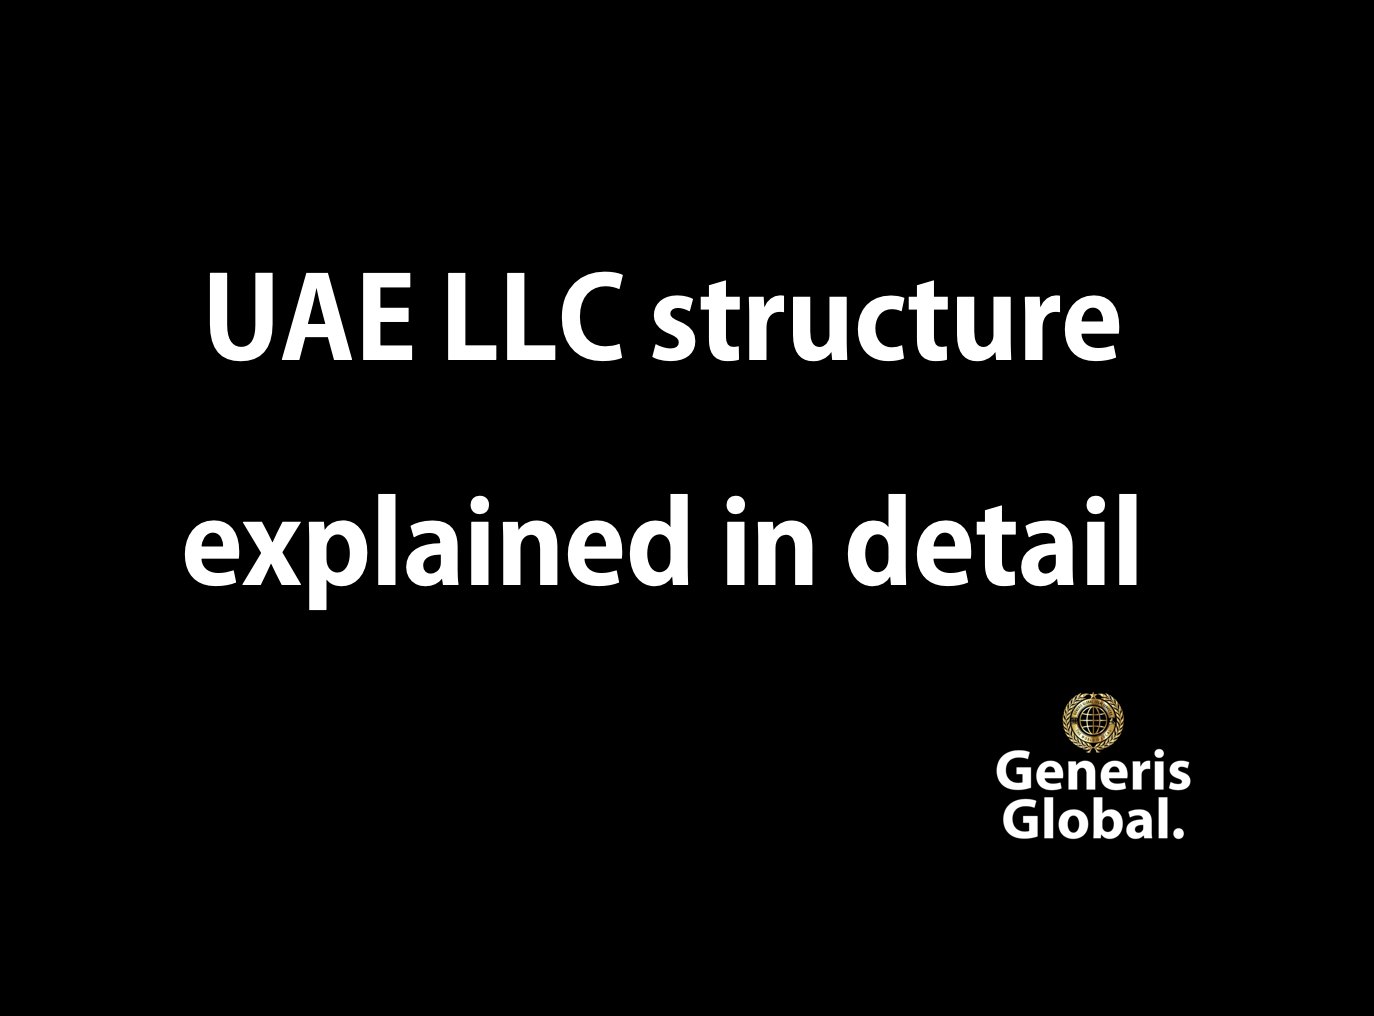 UAE LLC structure explained in detail